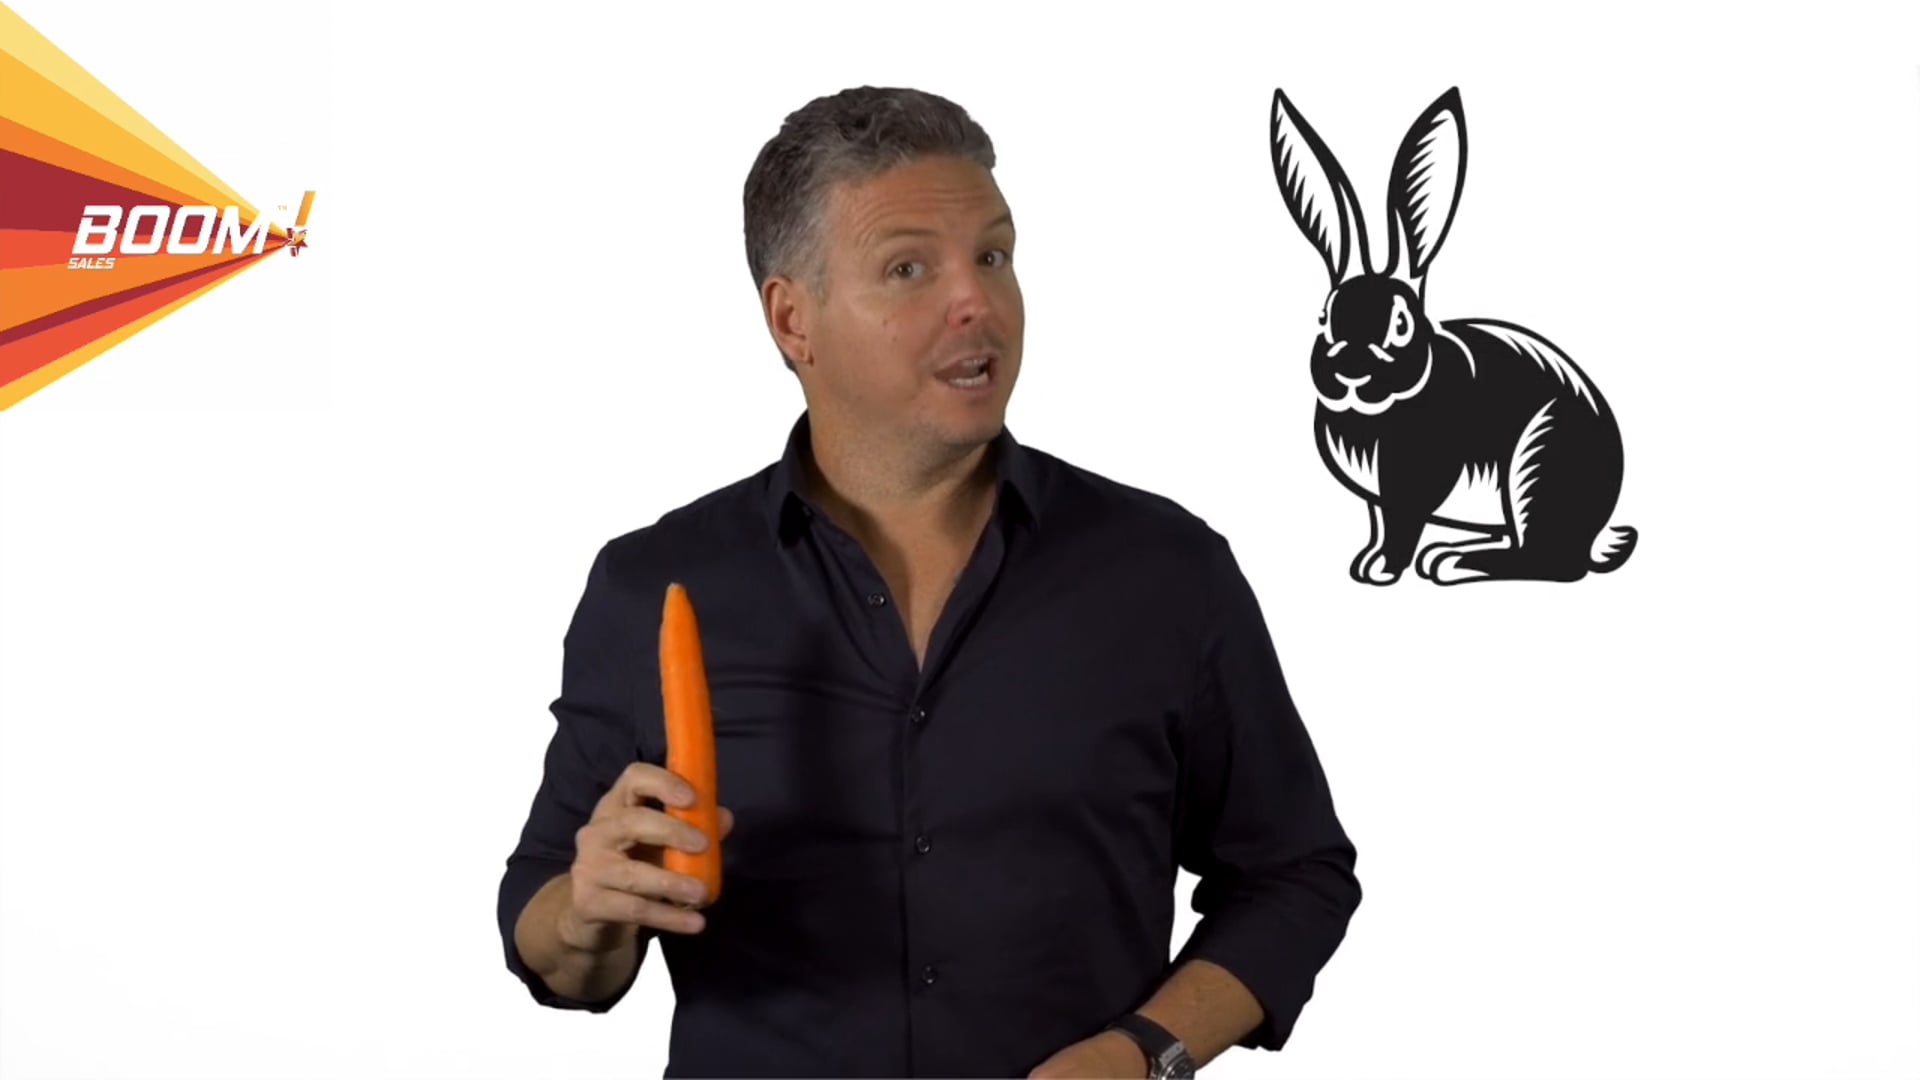 NEVER SELL A CARROT TO A RABBIT